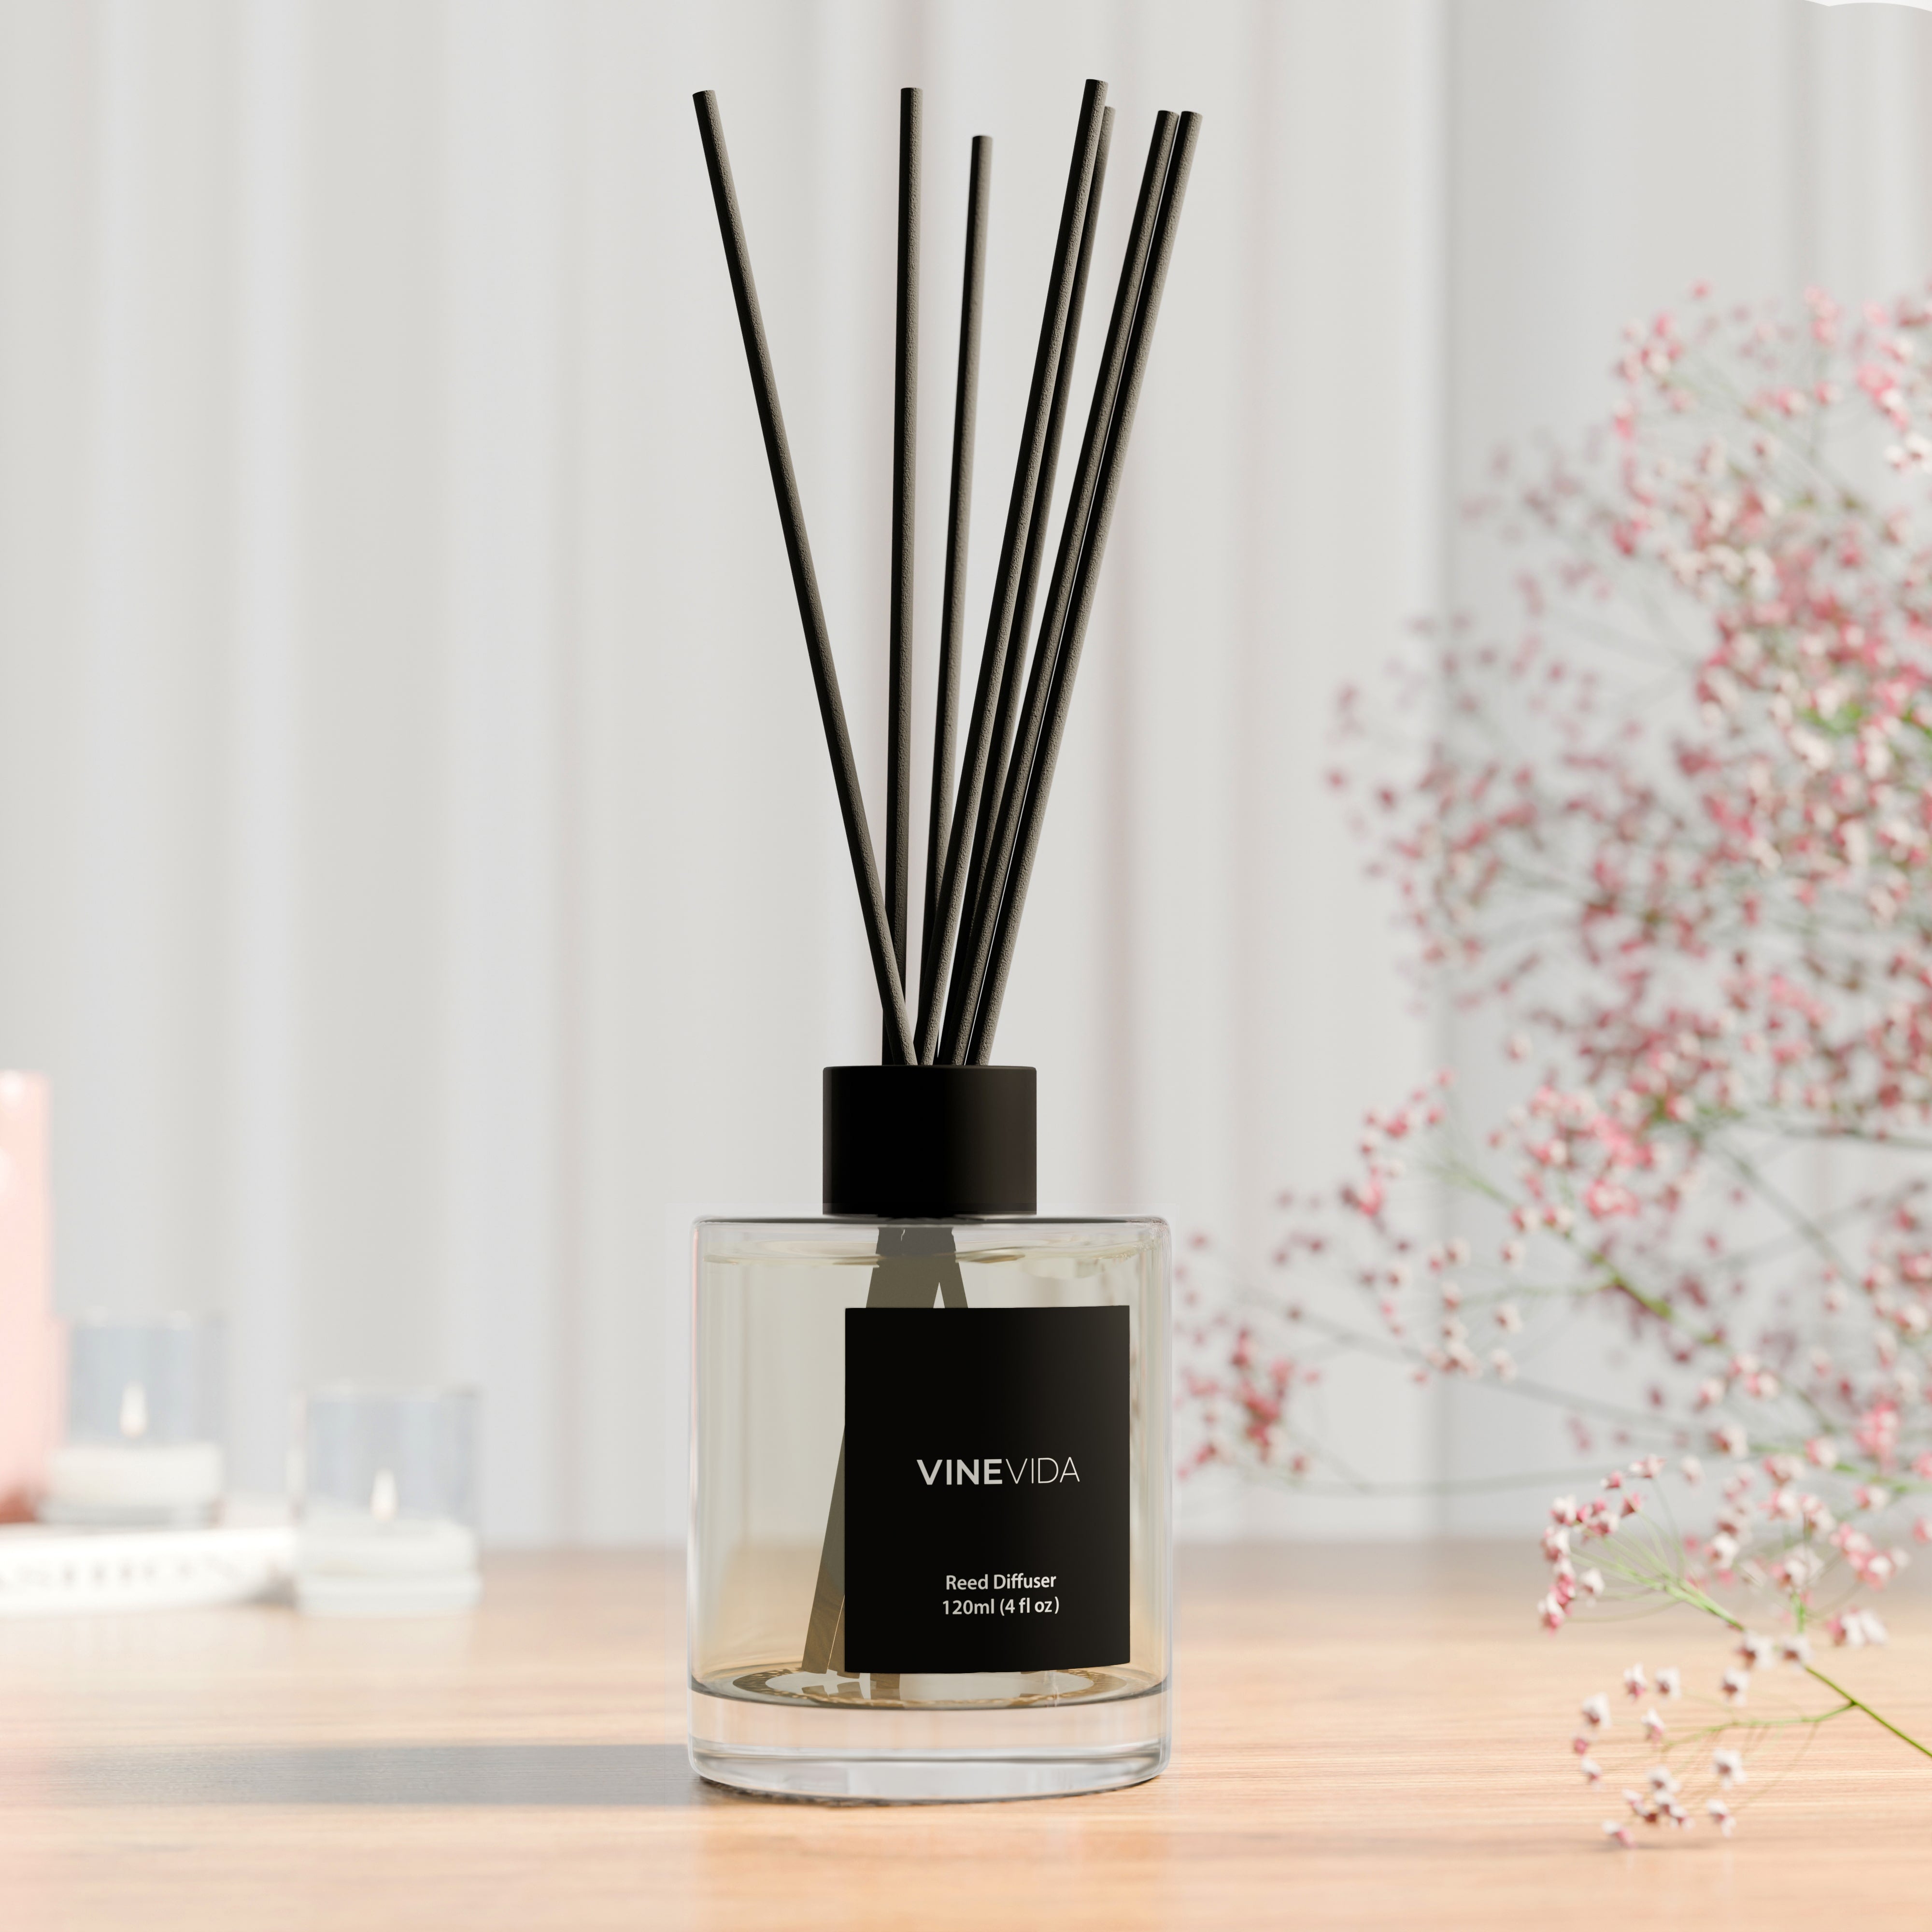 NO. 1121 Reed Diffuser - Inspired by: Watermelon Lemonade by Bath & Body Works